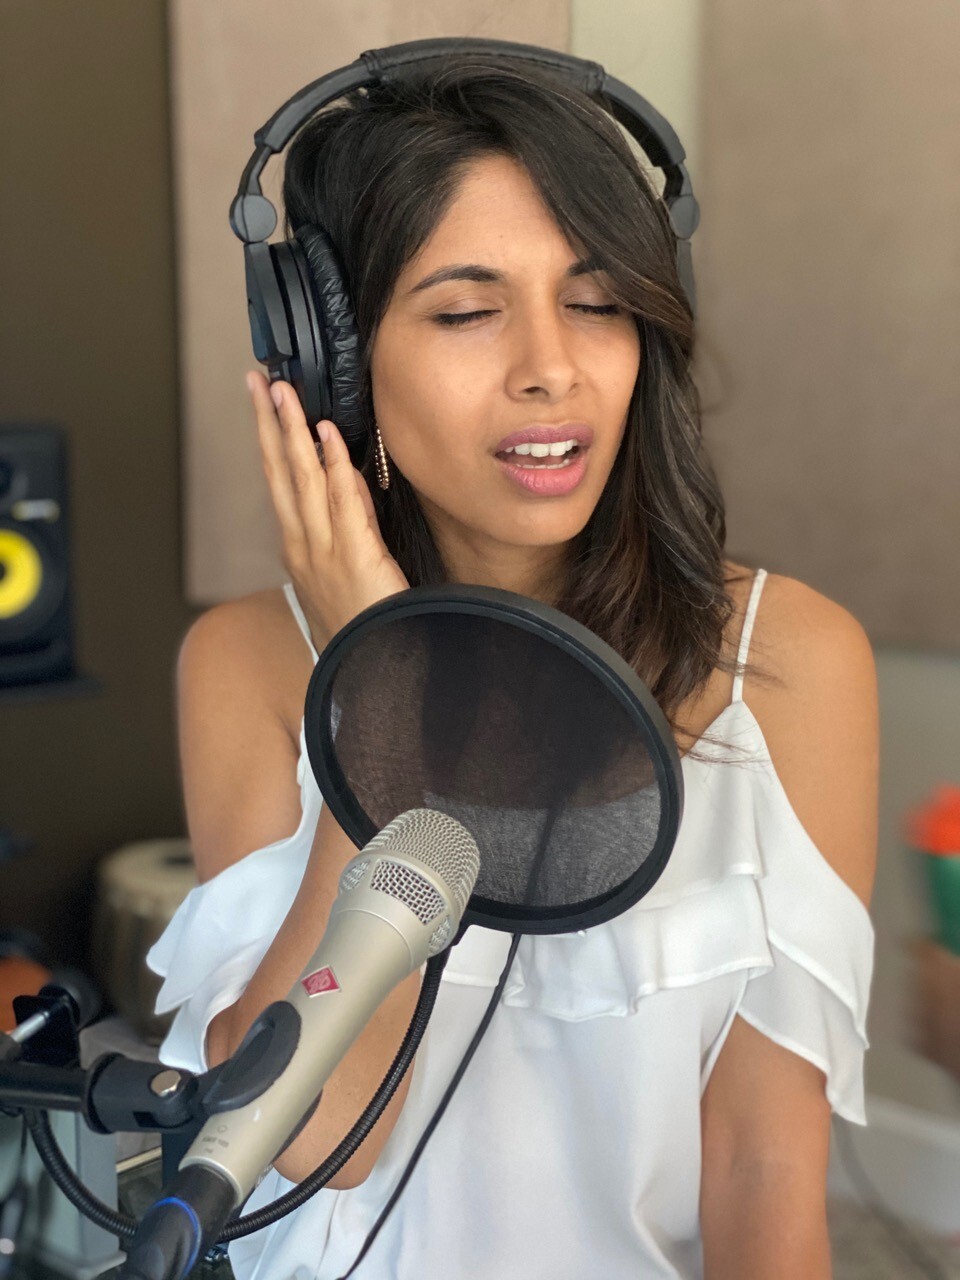 TikTok-famous singer-songwriter Sheena Melwani has ‘The Real Indian Dad’ to thank for her fame. But who is he really? Photo: Sheena Melwani